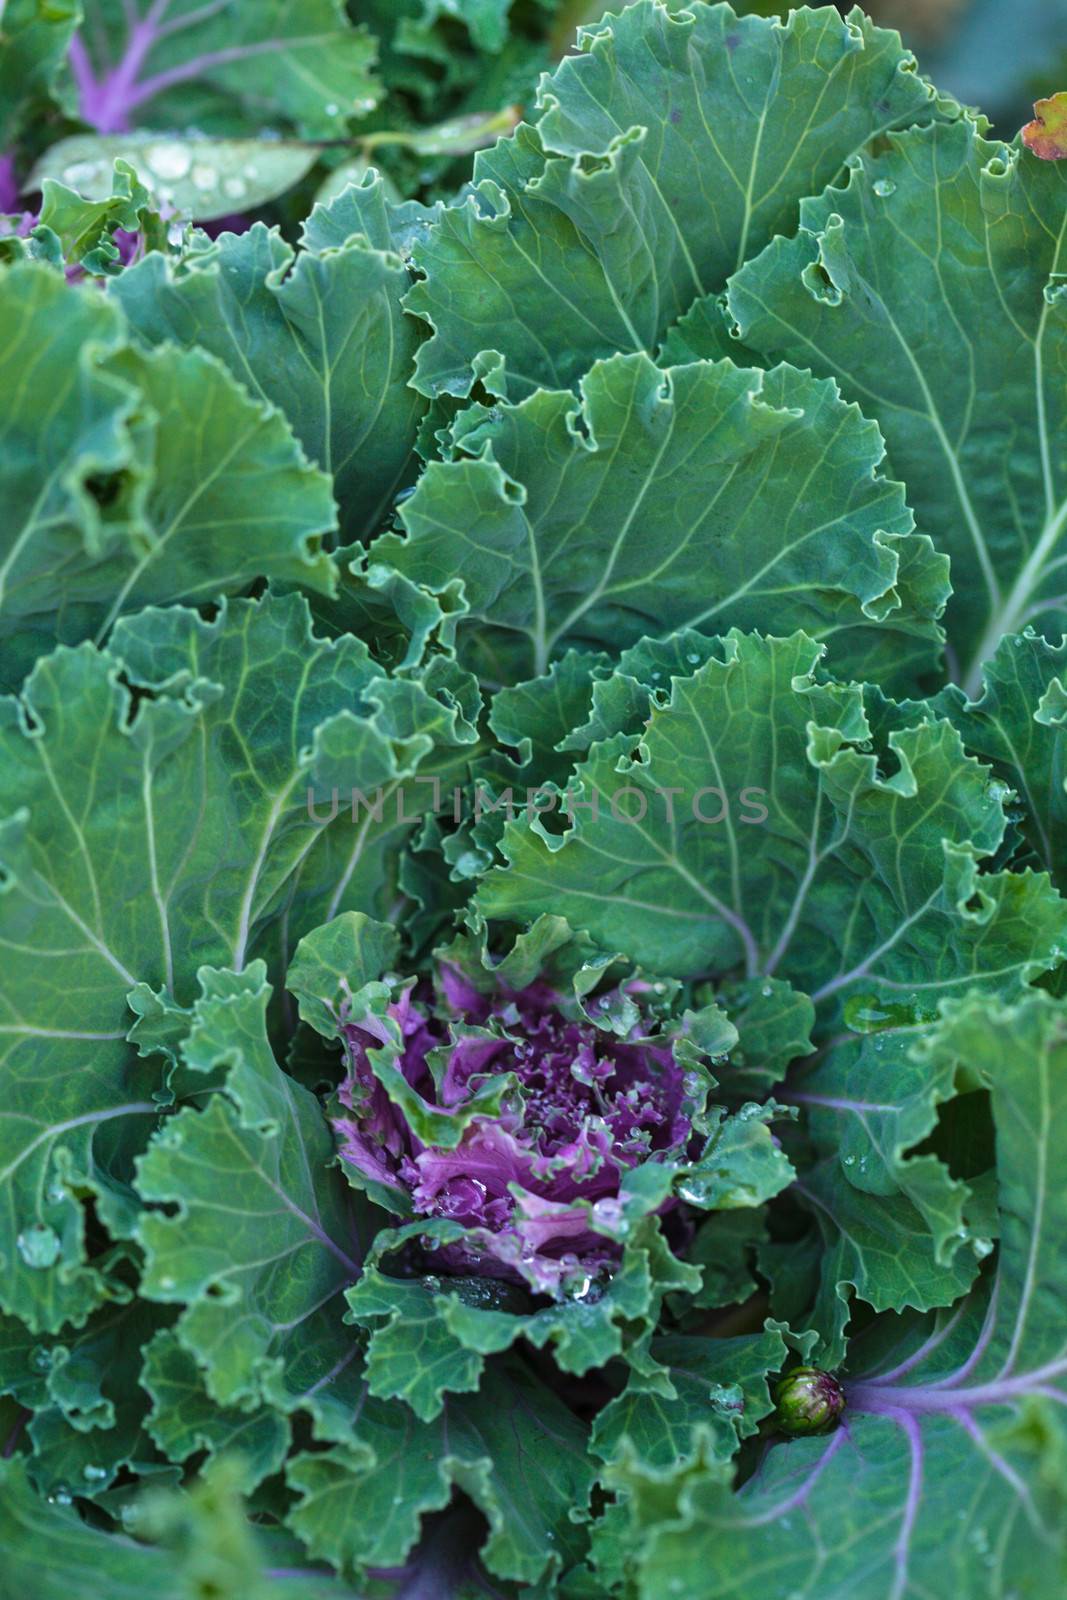 Decorative cabbage close up in the garden